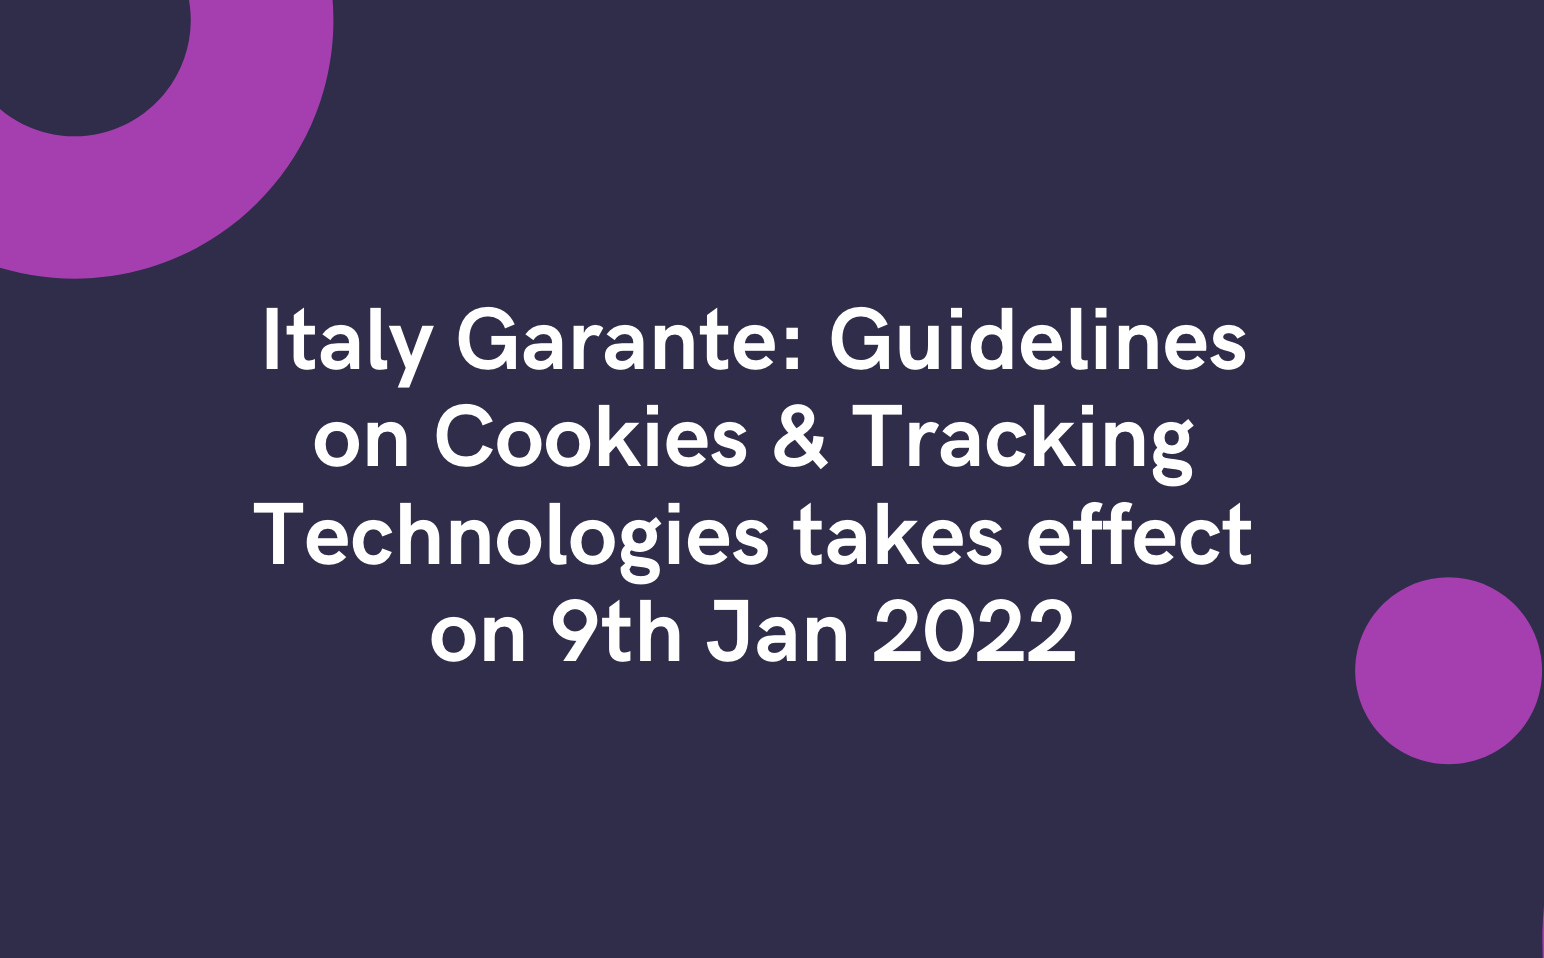 Italy Garante: Guidelines on Cookies & Tracking Technologies takes effect on 9th Jan 2022